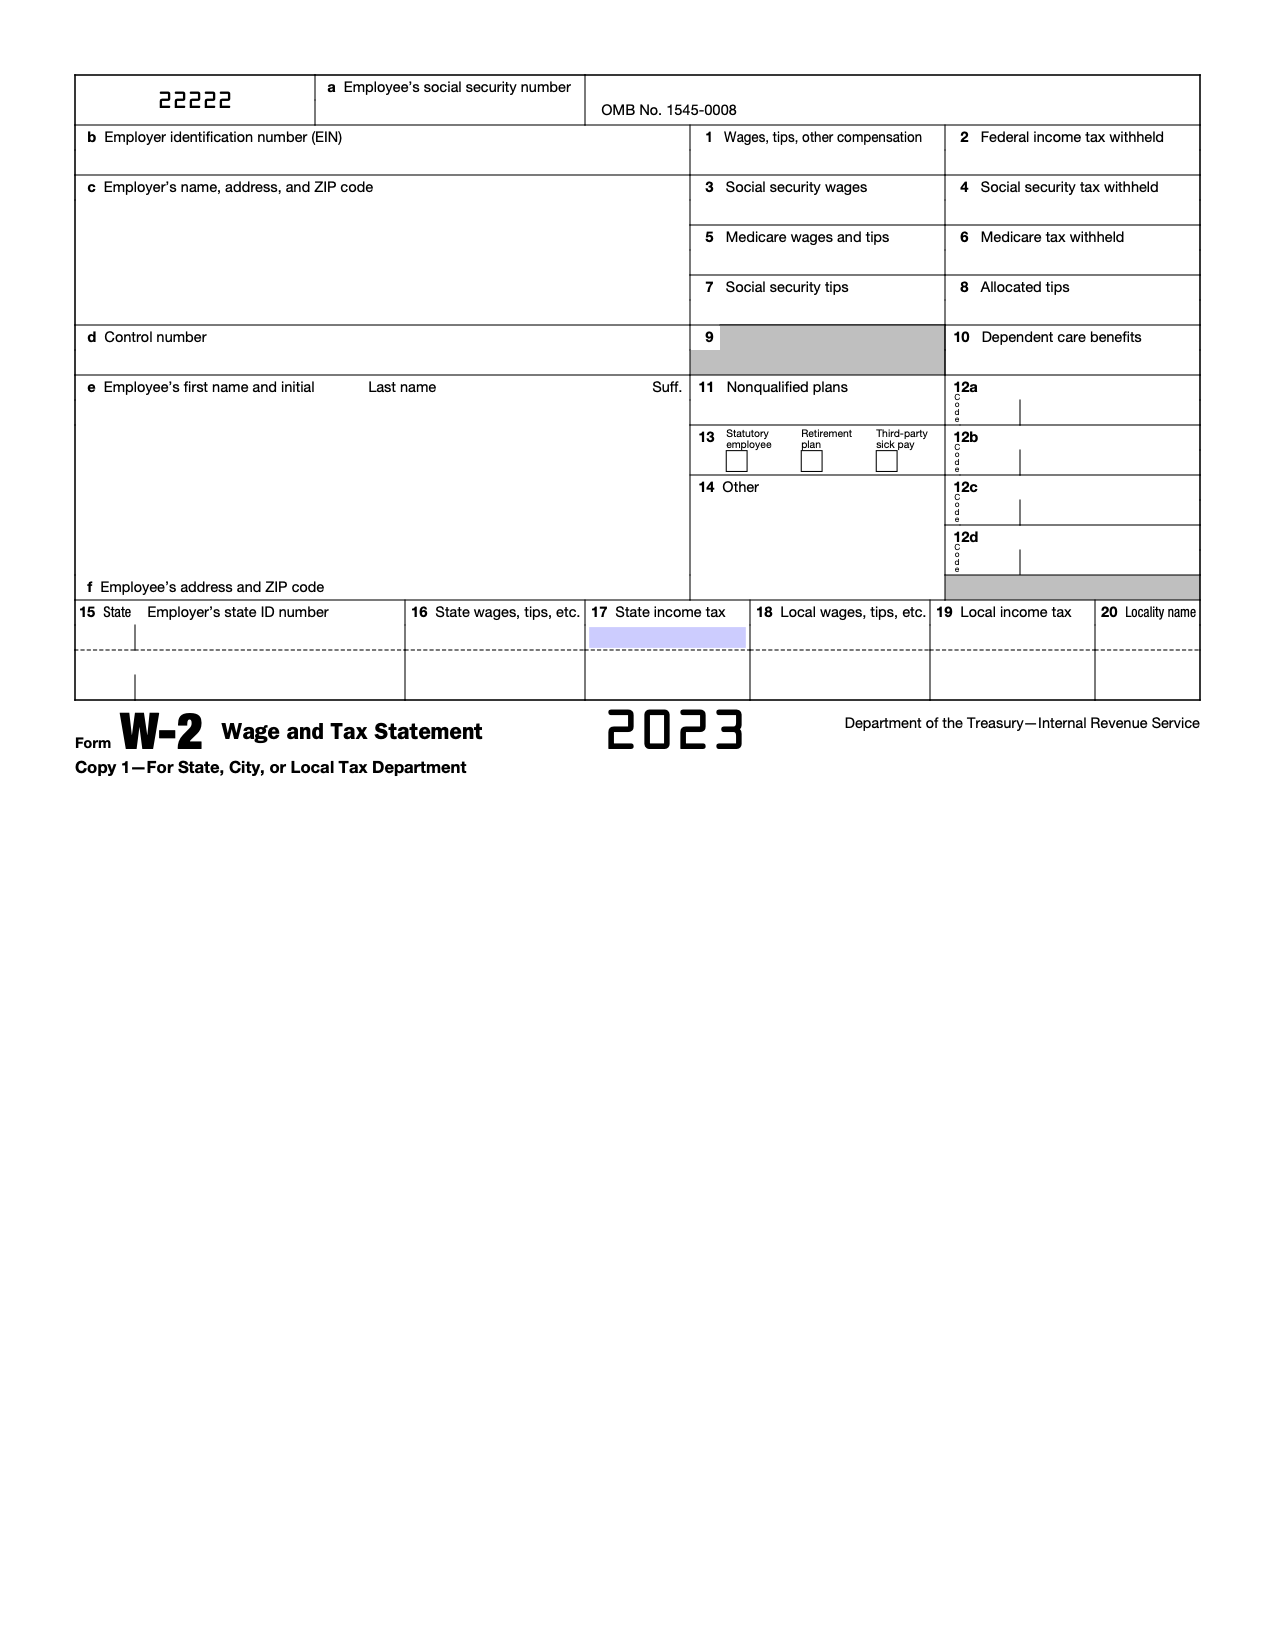 Free Irs Form W-2 | Wage And Tax Statement - Pdf – Eforms for Fill In W2 Forms Online Free